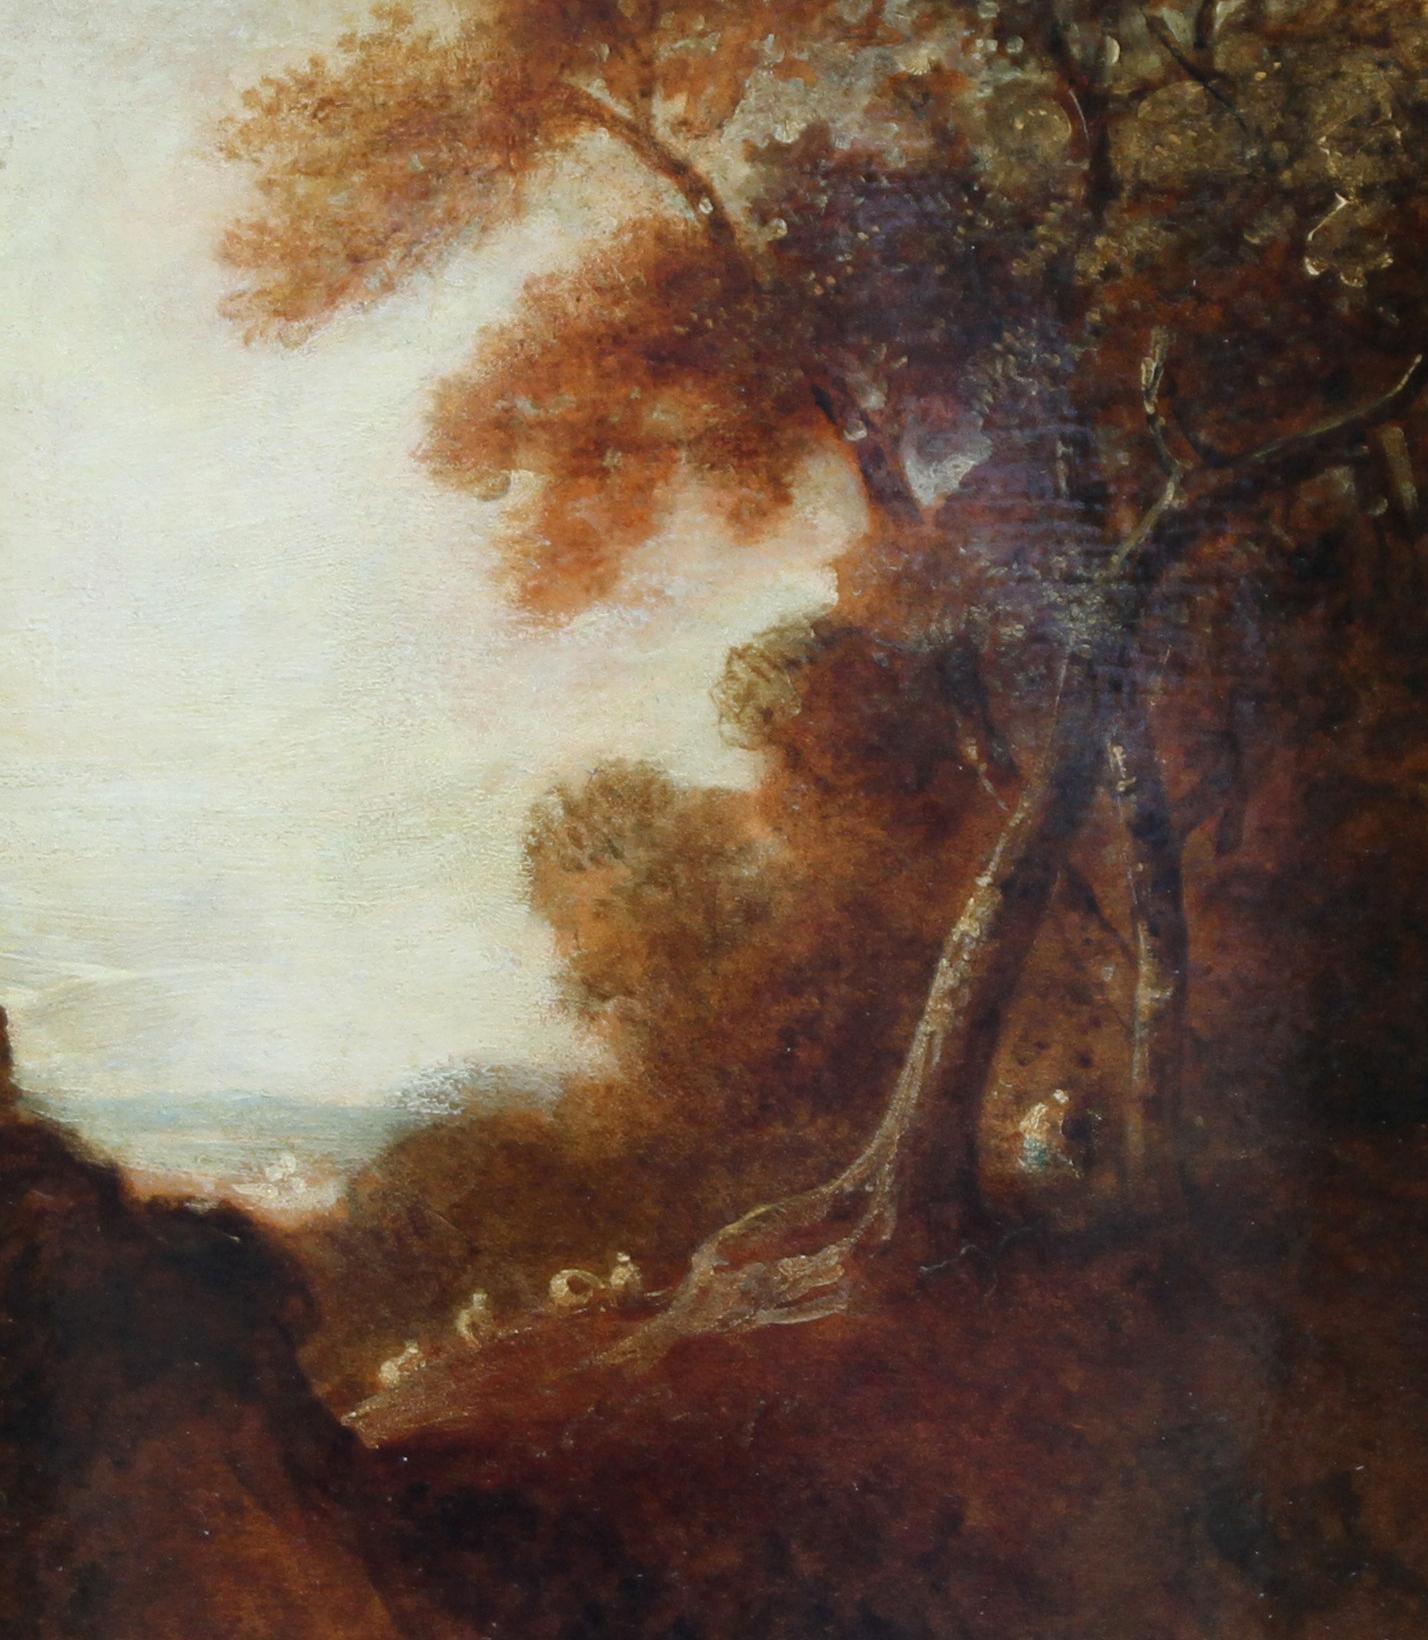 Wooded Landscape - British art 18thC Old Master oil painting trees figures - Old Masters Painting by Thomas Gainsborough (circle)